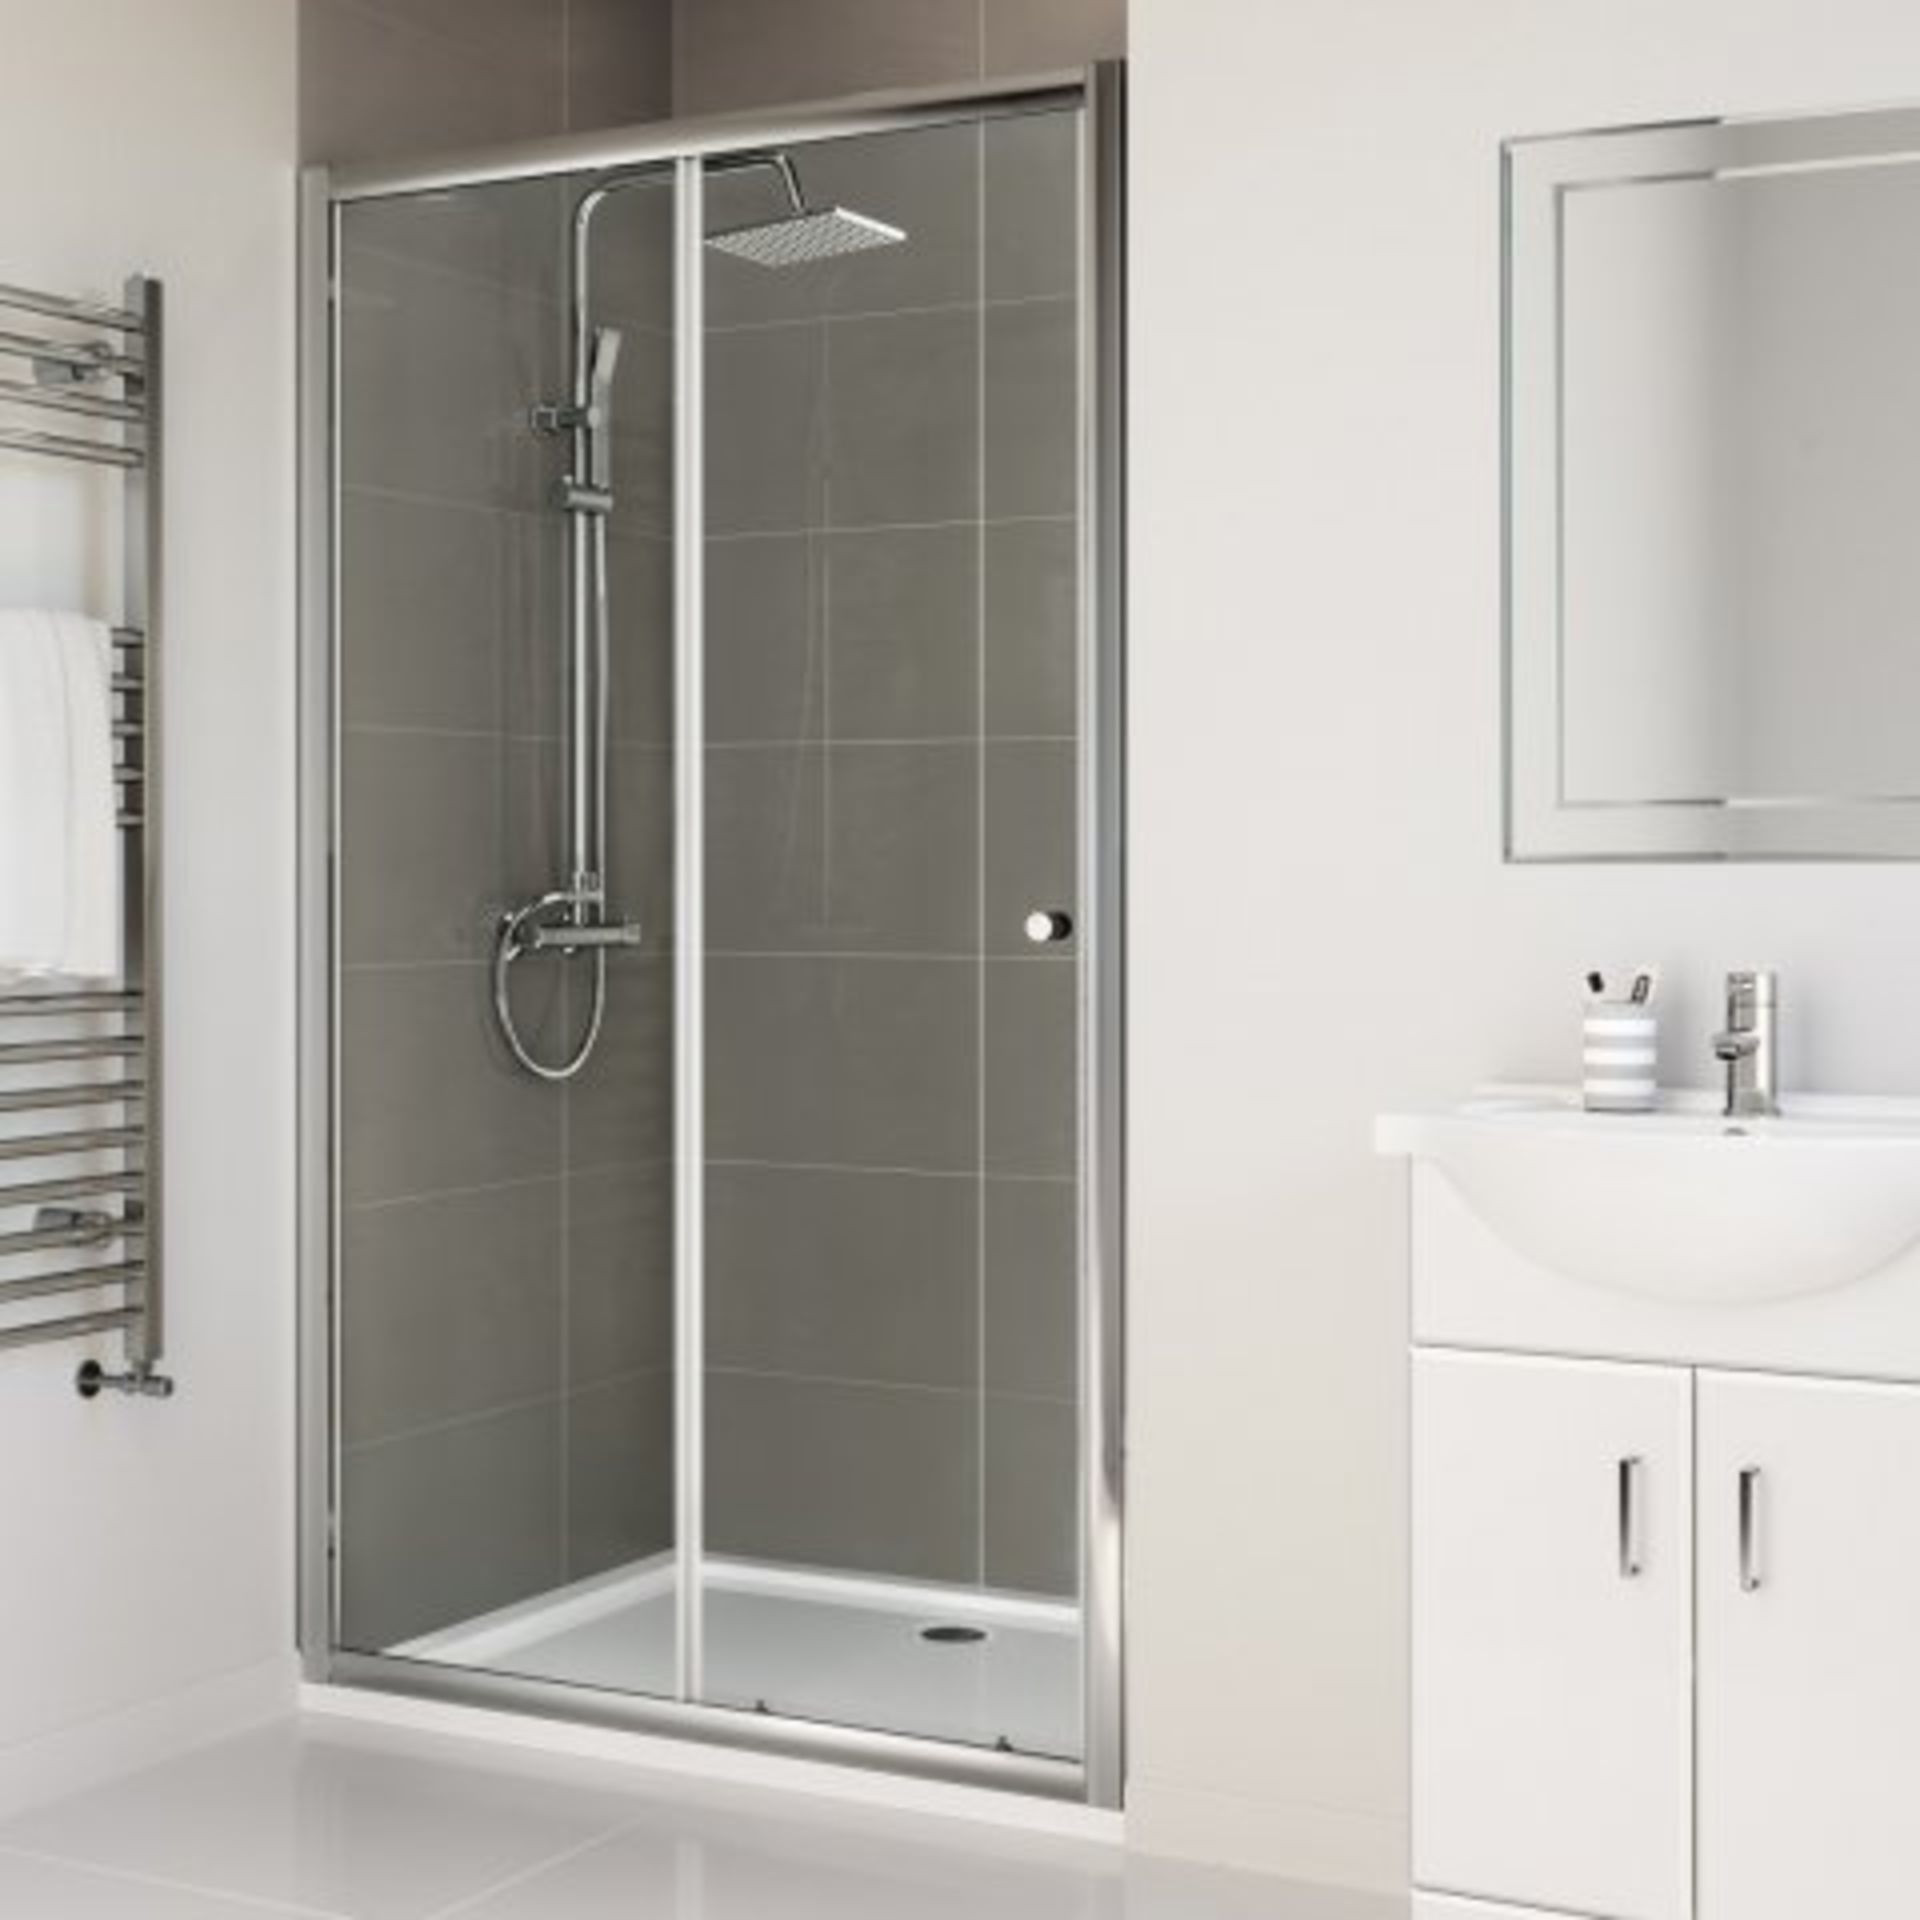 (N116) 1200mm - Elements Sliding Shower Door. RRP £299.99. Designed and crafted to improve the decor